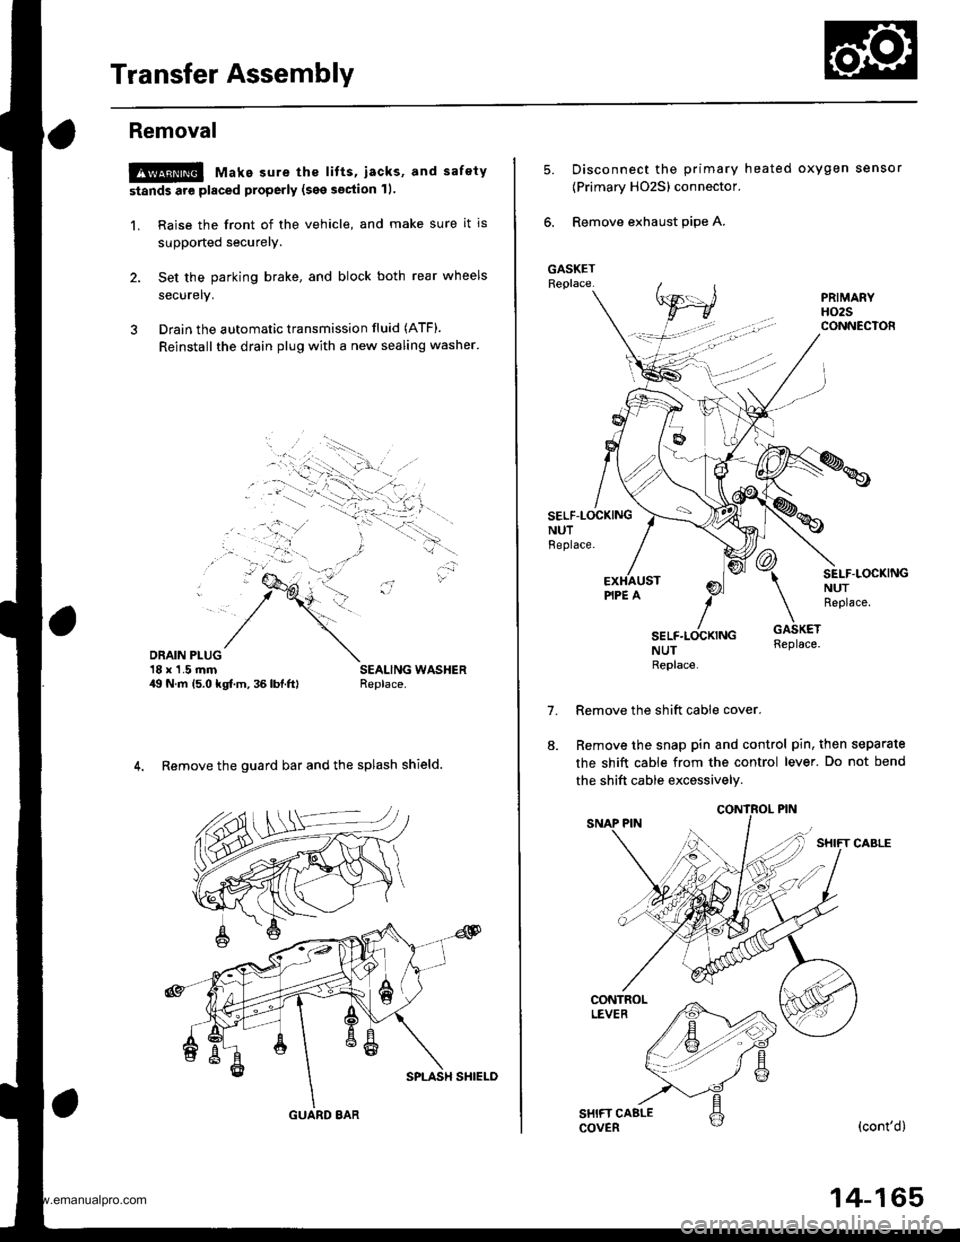 HONDA CR-V 2000 RD1-RD3 / 1.G Workshop Manual 
Transfer Assembly
Removal
@ Make sure the lifts, iacks, and safety
stands are placed properly (see section 11.
1. Raise the front of the vehicle, and make sure it is
supported securely.
2. Set the pa